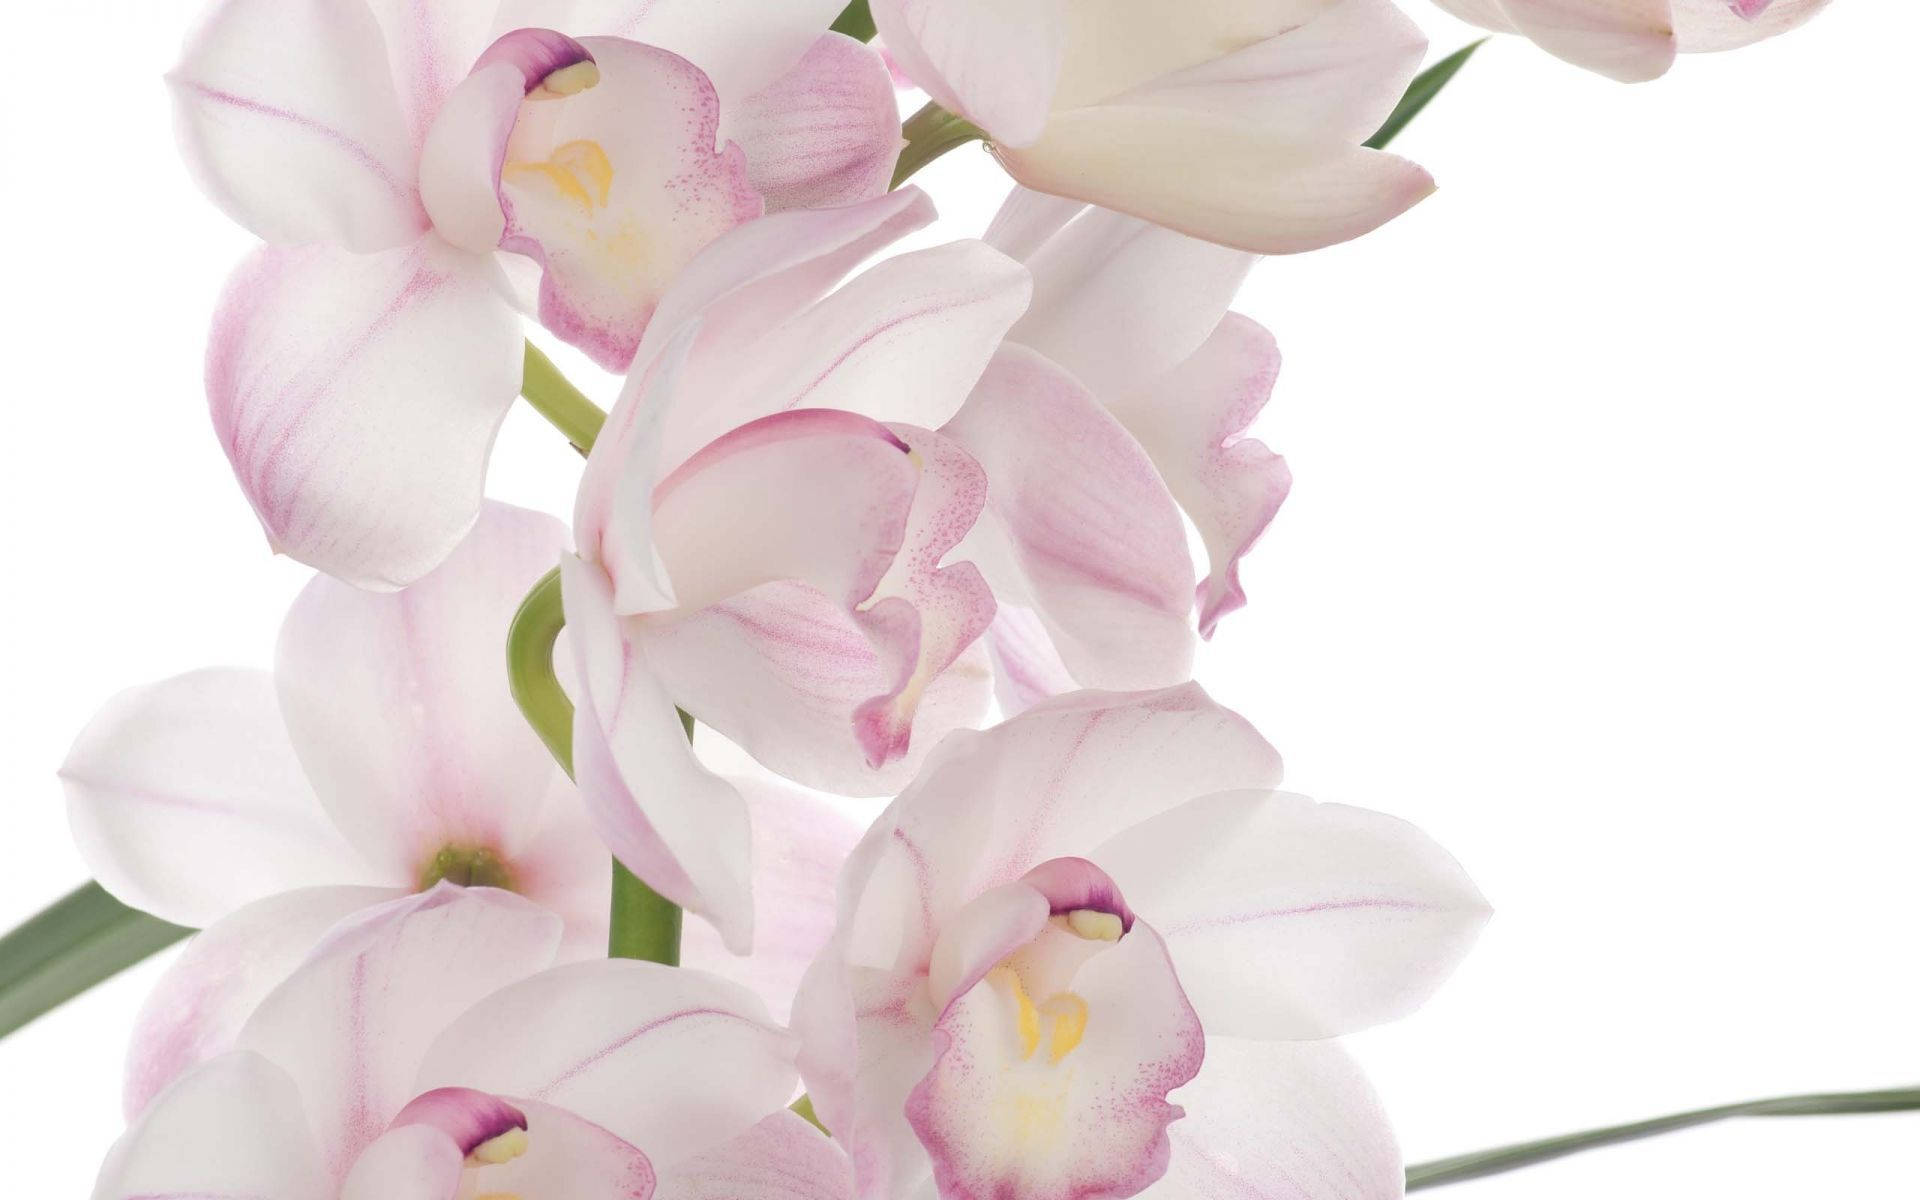 White Orchid With Pink Edge Petals Wallpaper